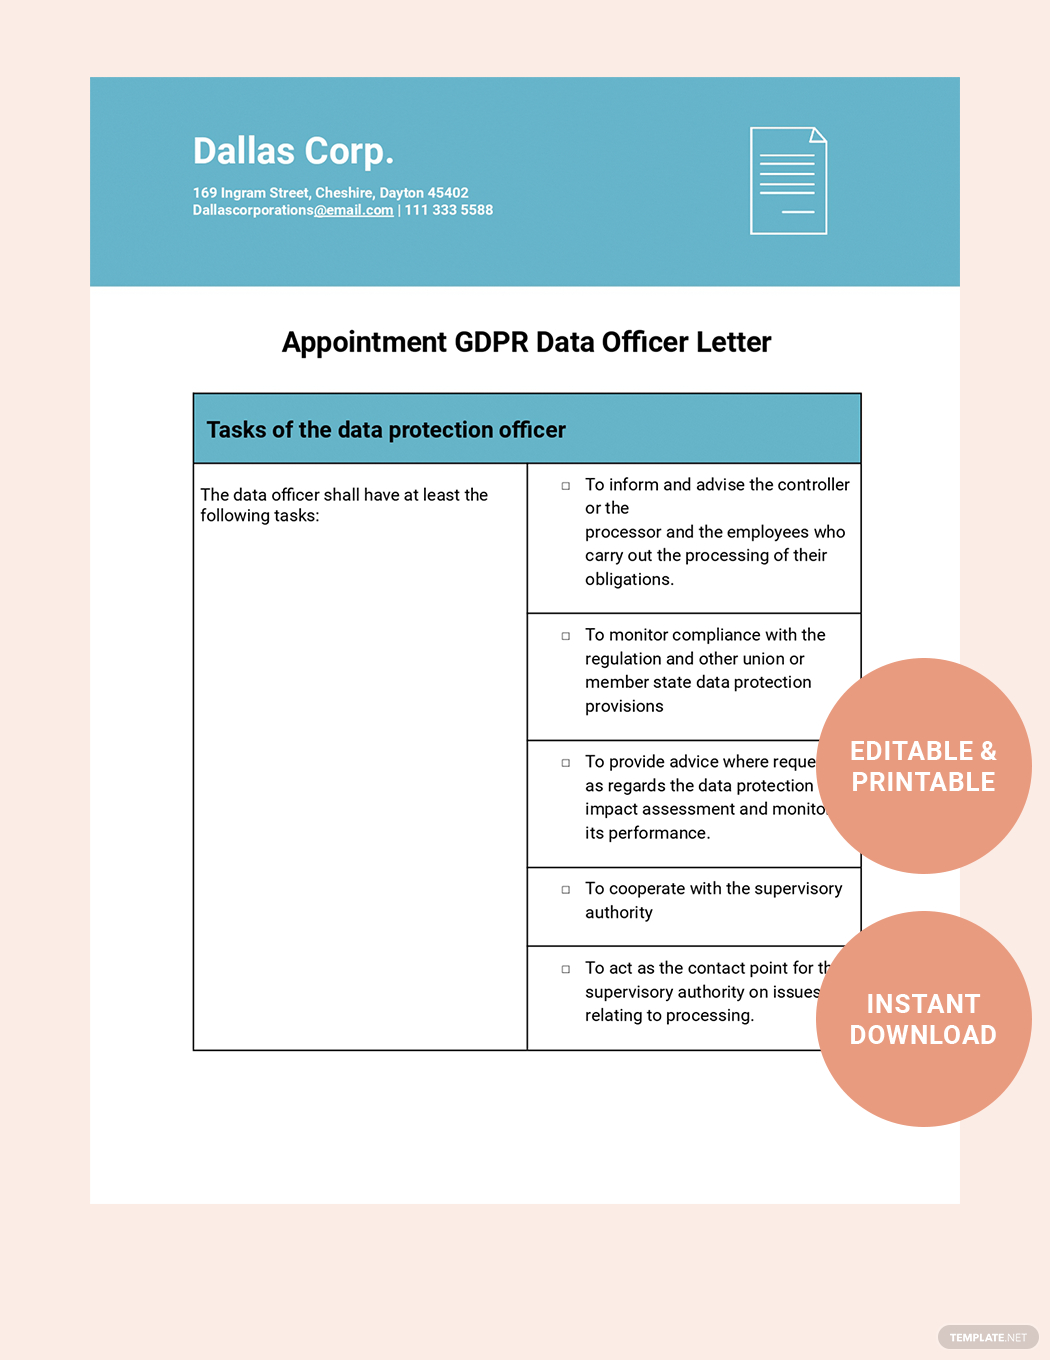 appointment gdpr data officer letter